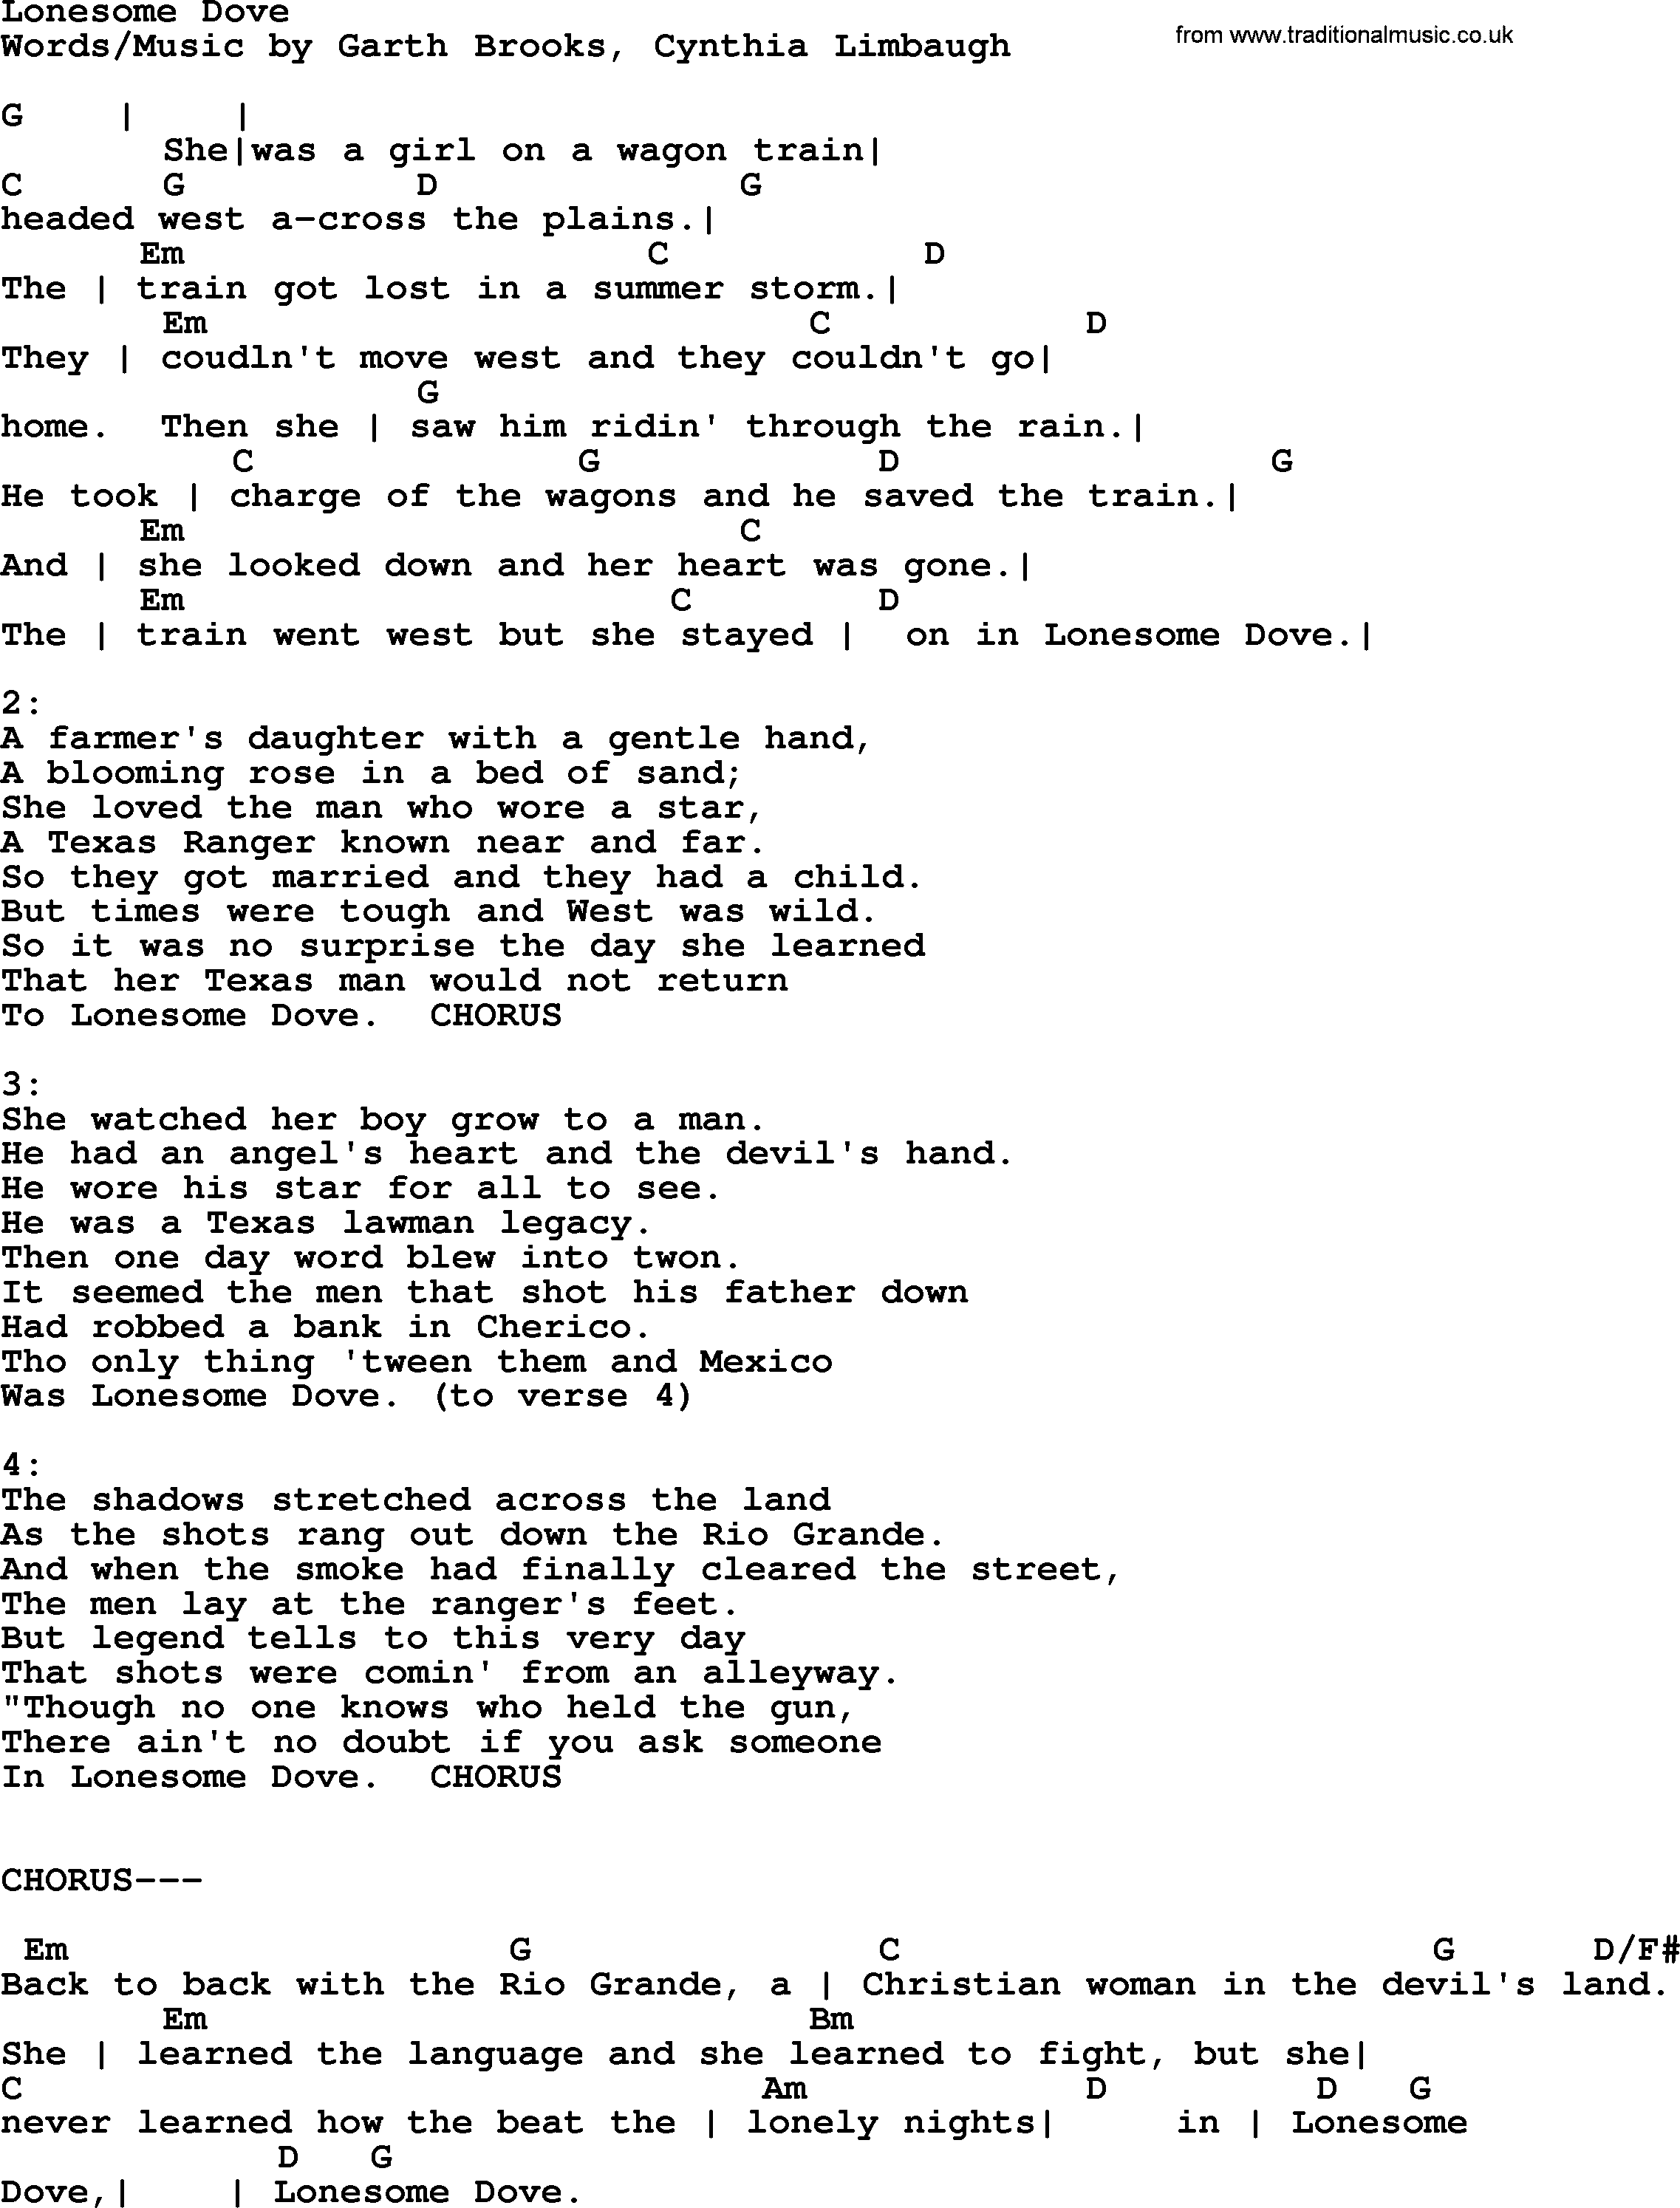 Garth Brooks song: Lonesome Dove, lyrics and chords